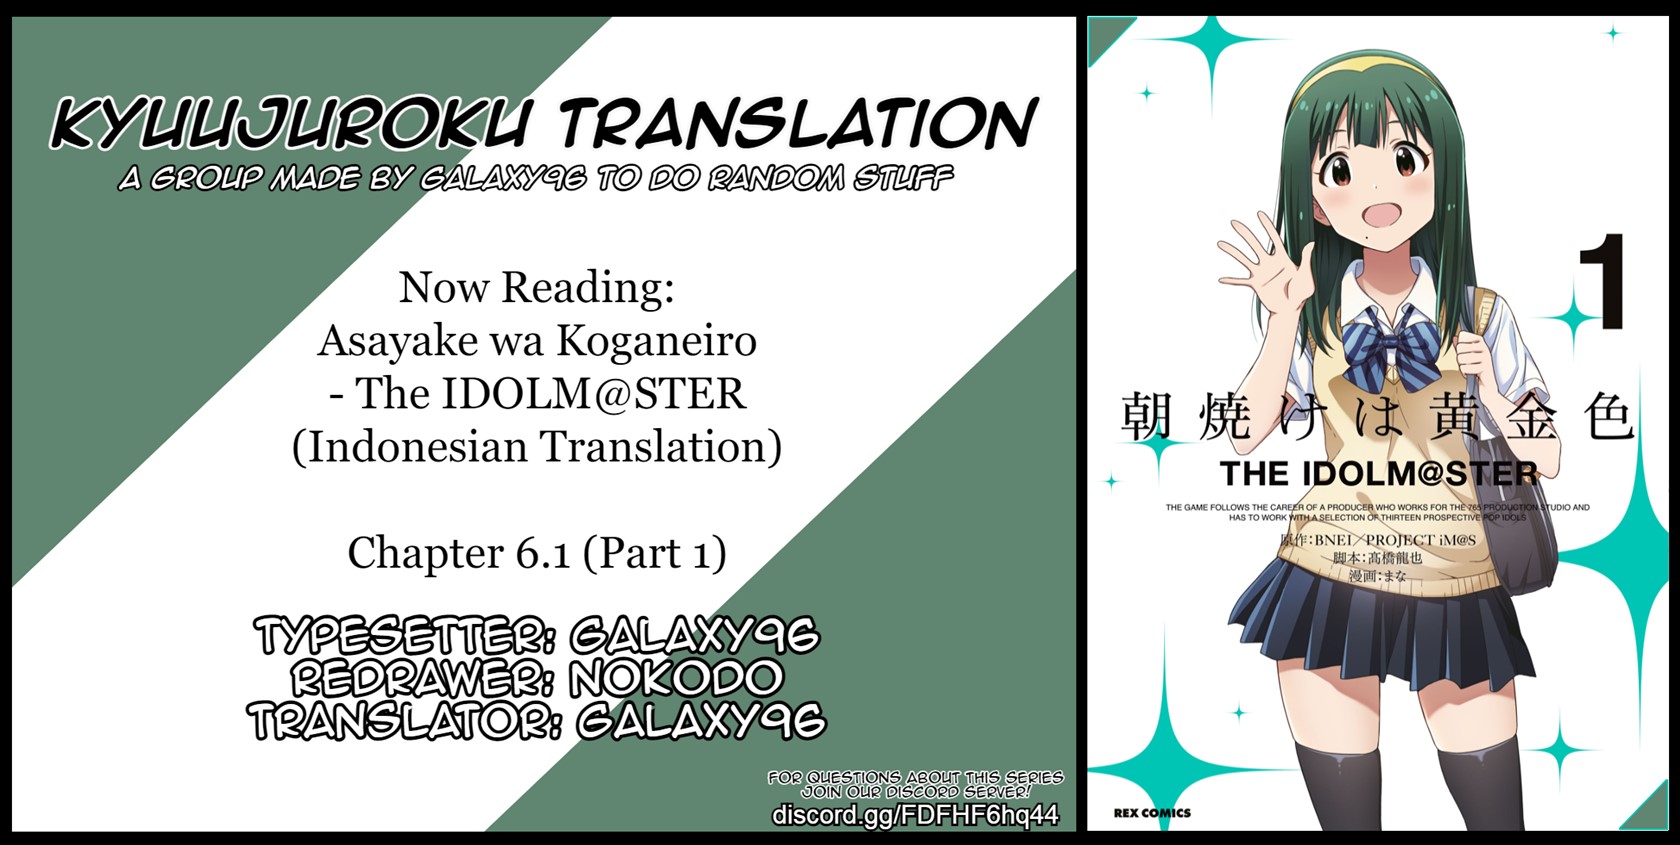 Morning Glow is Golden: The IDOLM@STER Chapter 6.1